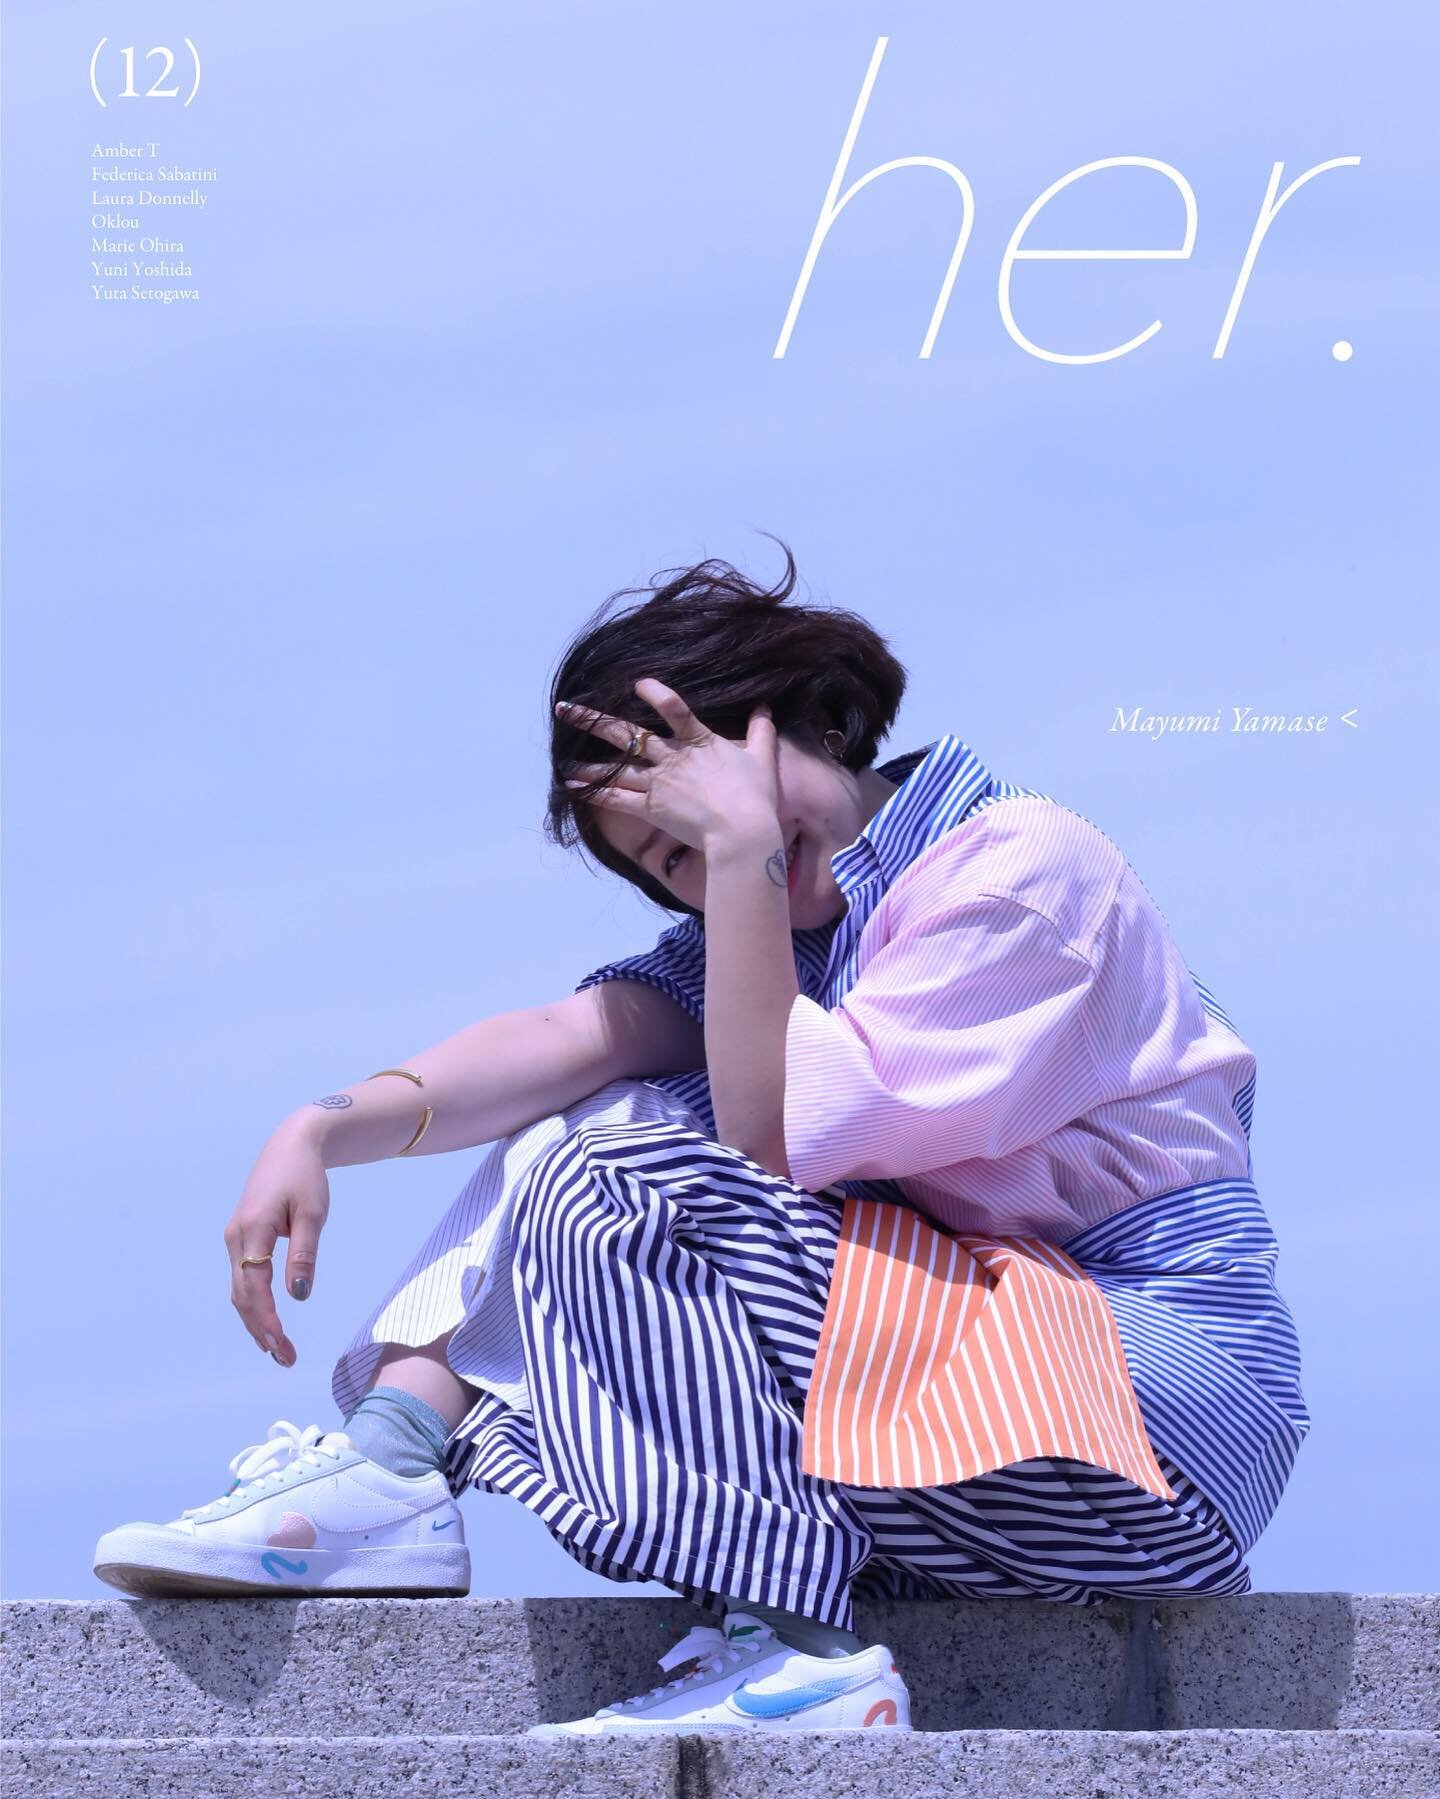 her. magazine issue 12 featuring Mayumi Yamase shot by James Oliver coming soon. Pre-order now at our online store.

@zmzm_mayu #mayumiyamase @jamesoliver_tno #jamesoliver